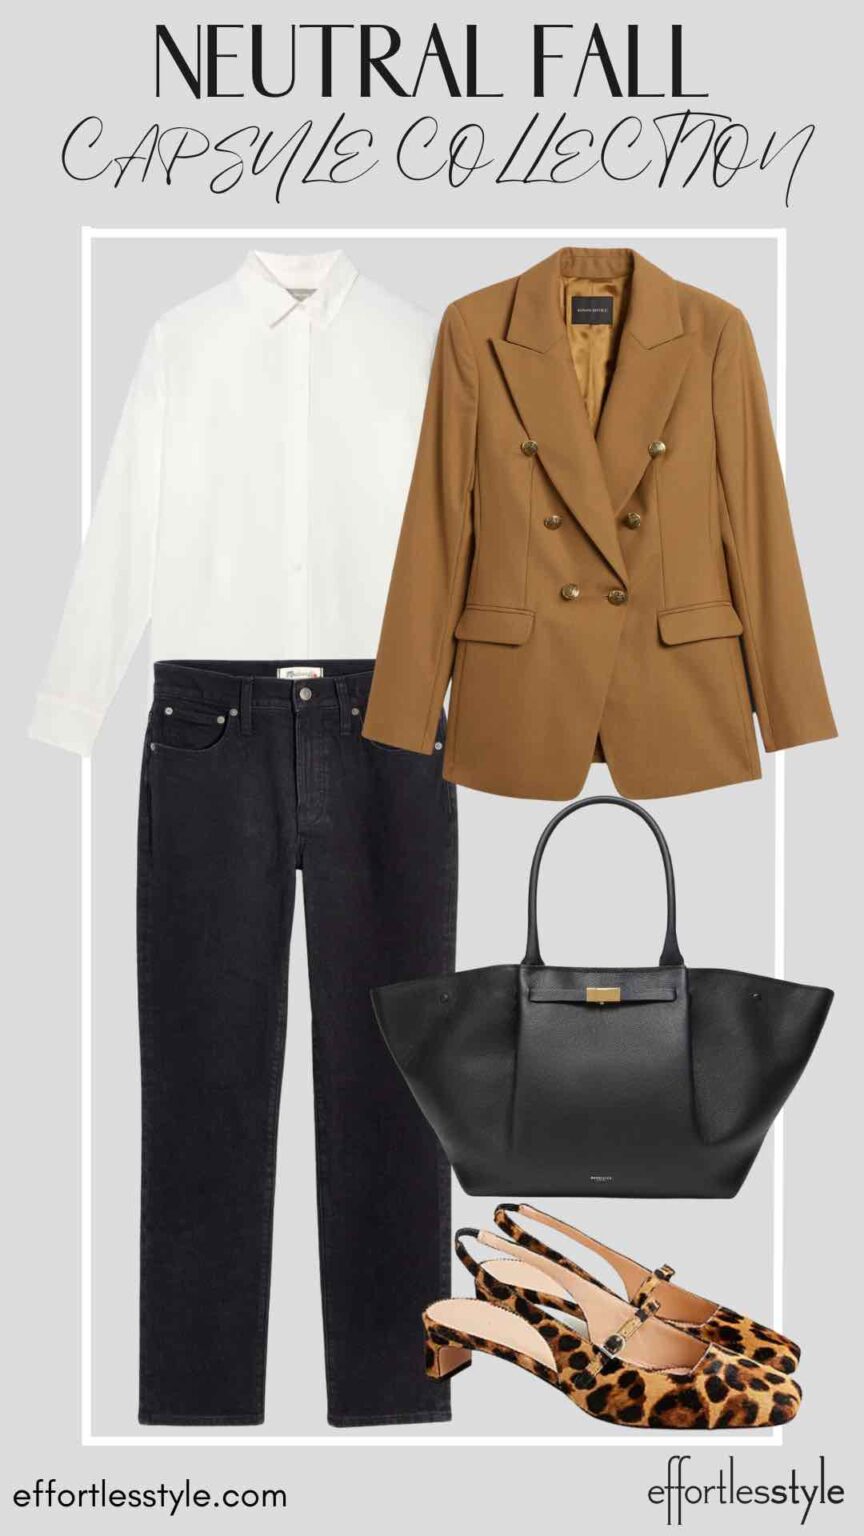 How To Wear Our Neutral Fall Capsule Wardrobe - Part 1 - Effortless ...